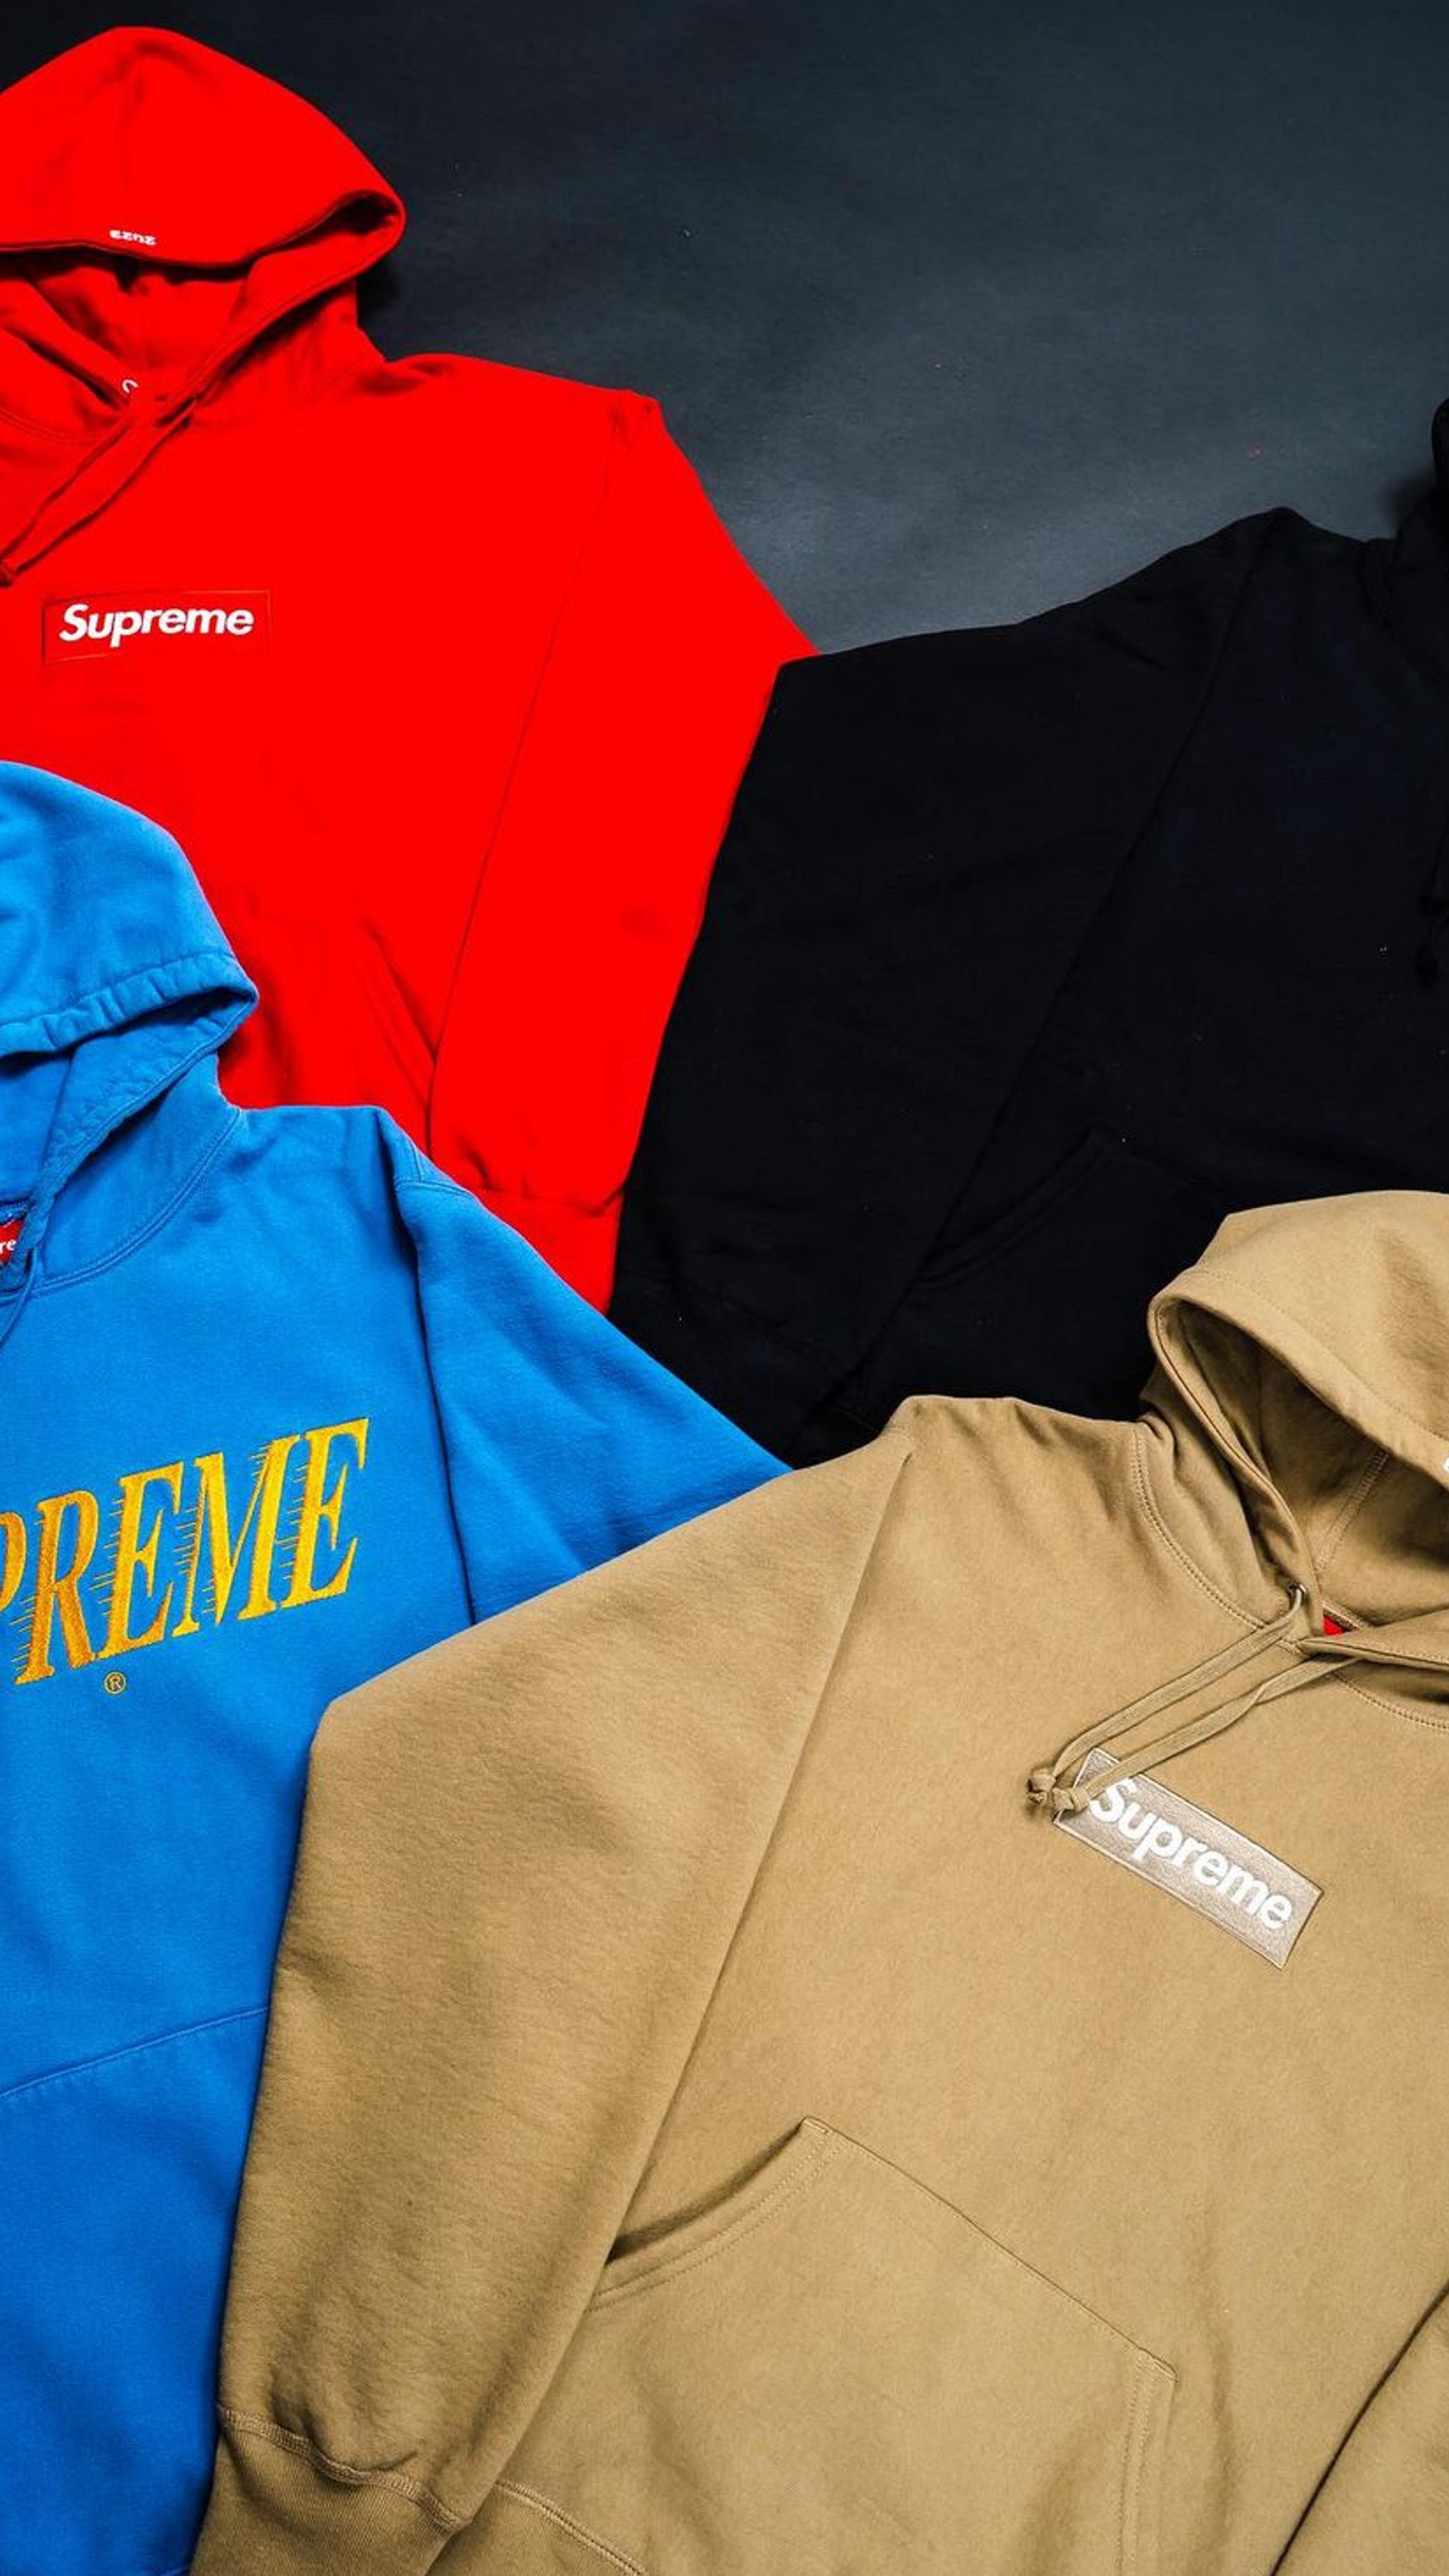 Preview image for the show titled "Supreme " at Today @ 5:45 PM